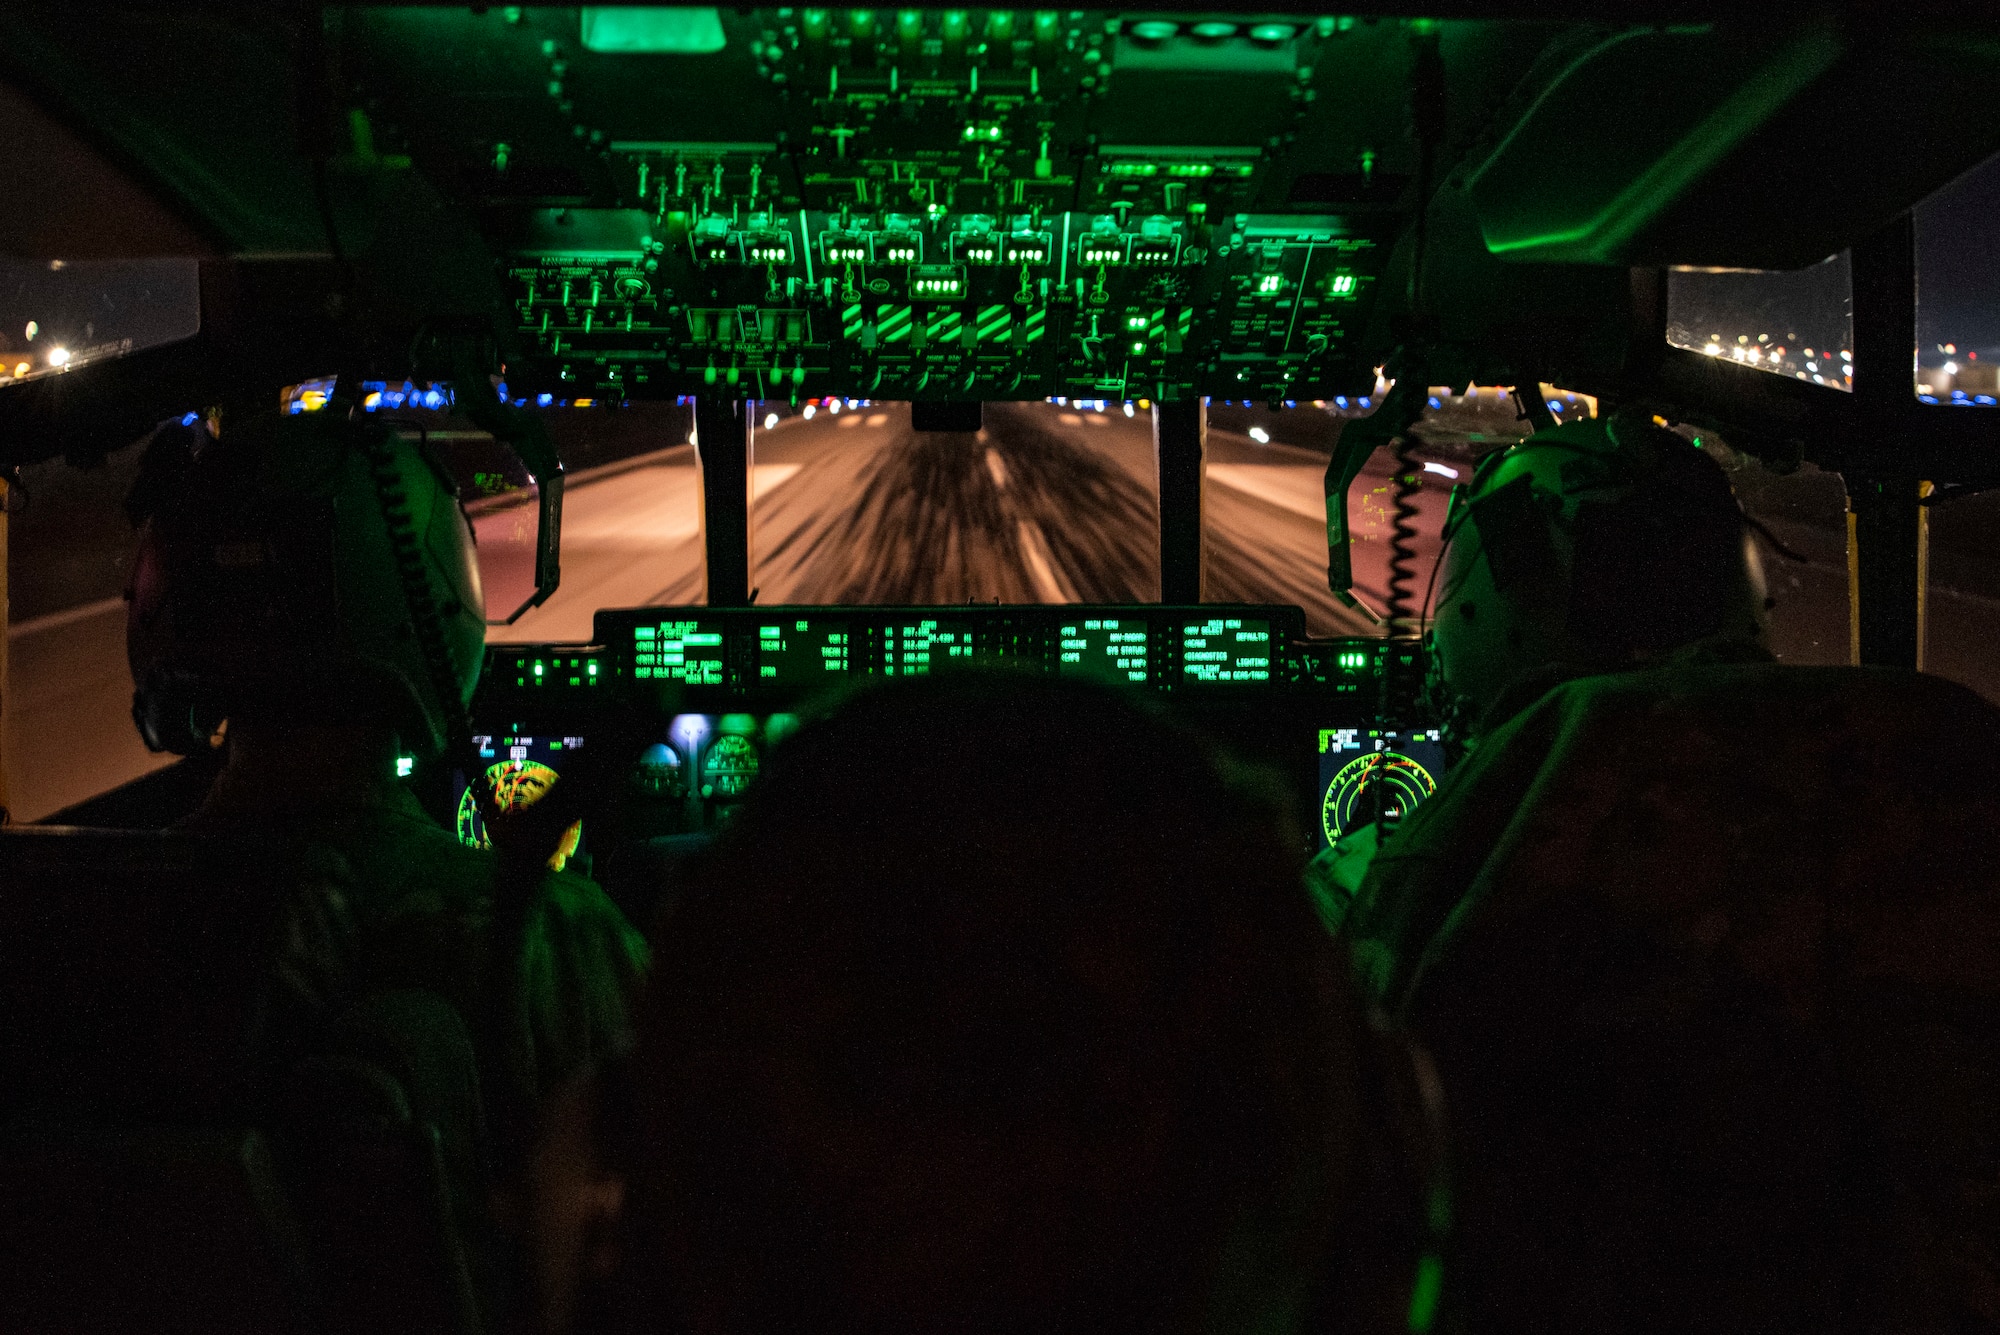 U.S. Air Force Capt. Ryan Murphy, 40th Airlift Squadron pilot, and Capt. James Wishart, 40th AS co-pilot, land a C-130J Super Hercules, at Pope Army Airfield, North Carolina, Jan. 24, 2023. During Battalion Mass Tactical Week, the 317th Airlift Wing integrated with the 16th Airlift Squadron, Joint Base Charleston, South Carolina, and the 82nd Division, Fort Bragg, North Carolina to train as an integrated force alongside the Army. (U.S. Air Force photo by Airman 1st Class Ryan Hayman)